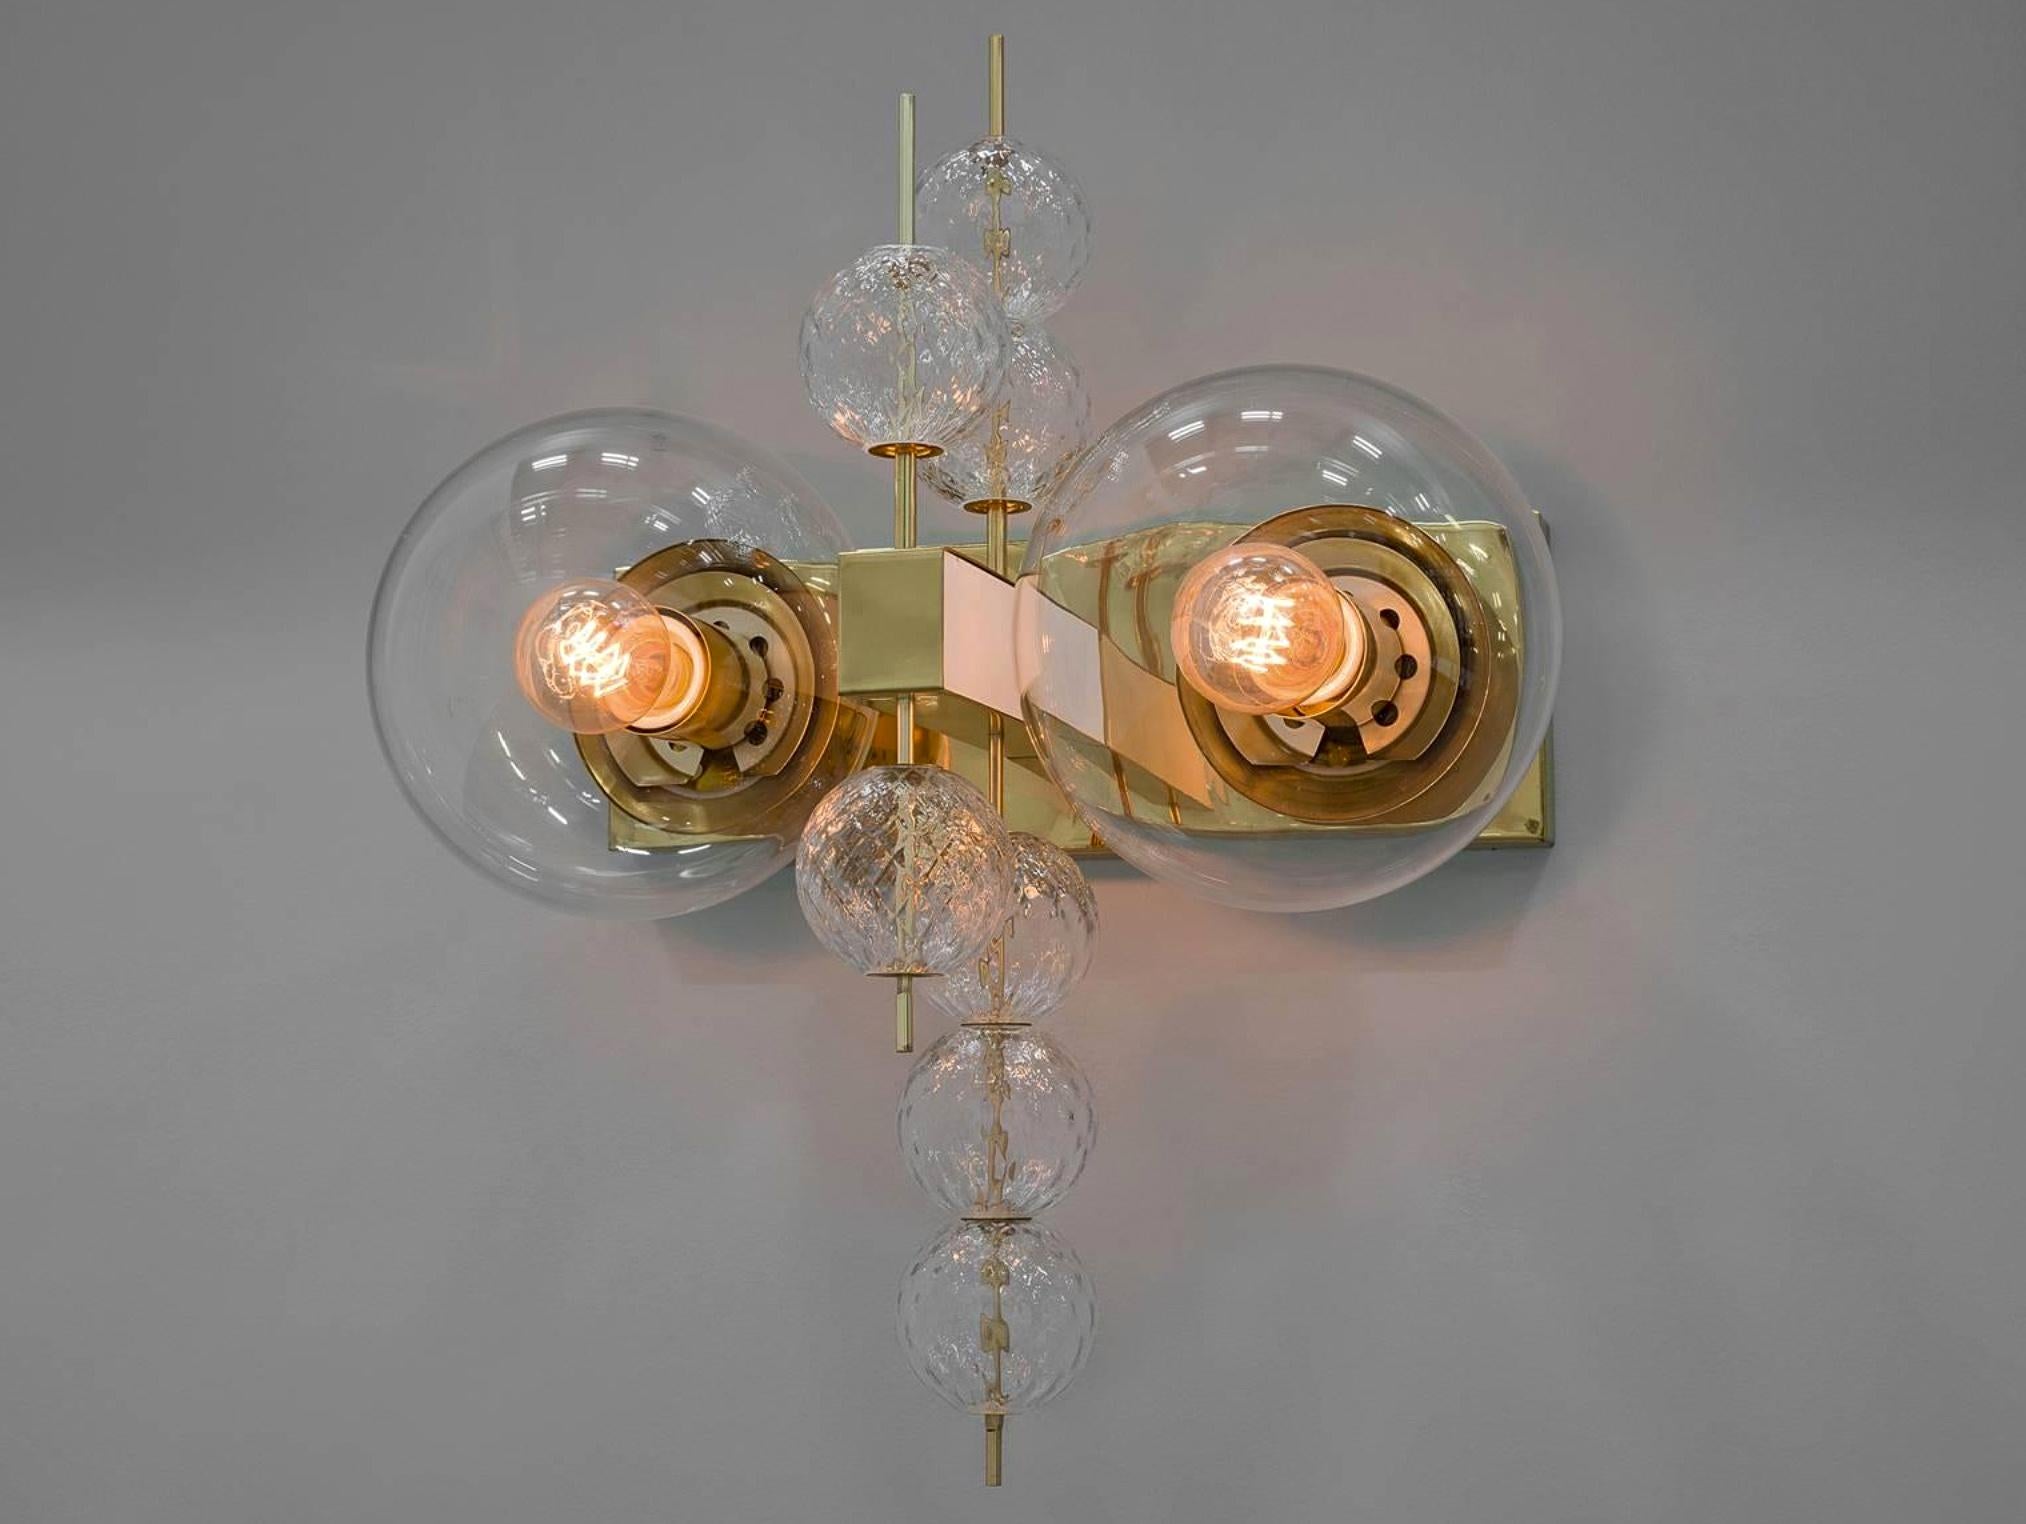 Large set hotel wall chandeliers with brass fixture and large handblown glass. The scones are beautifully decorated thanks to the structured glass. The pleasant light it spreads is very atmospheric, these wall chandeliers will contribute to a